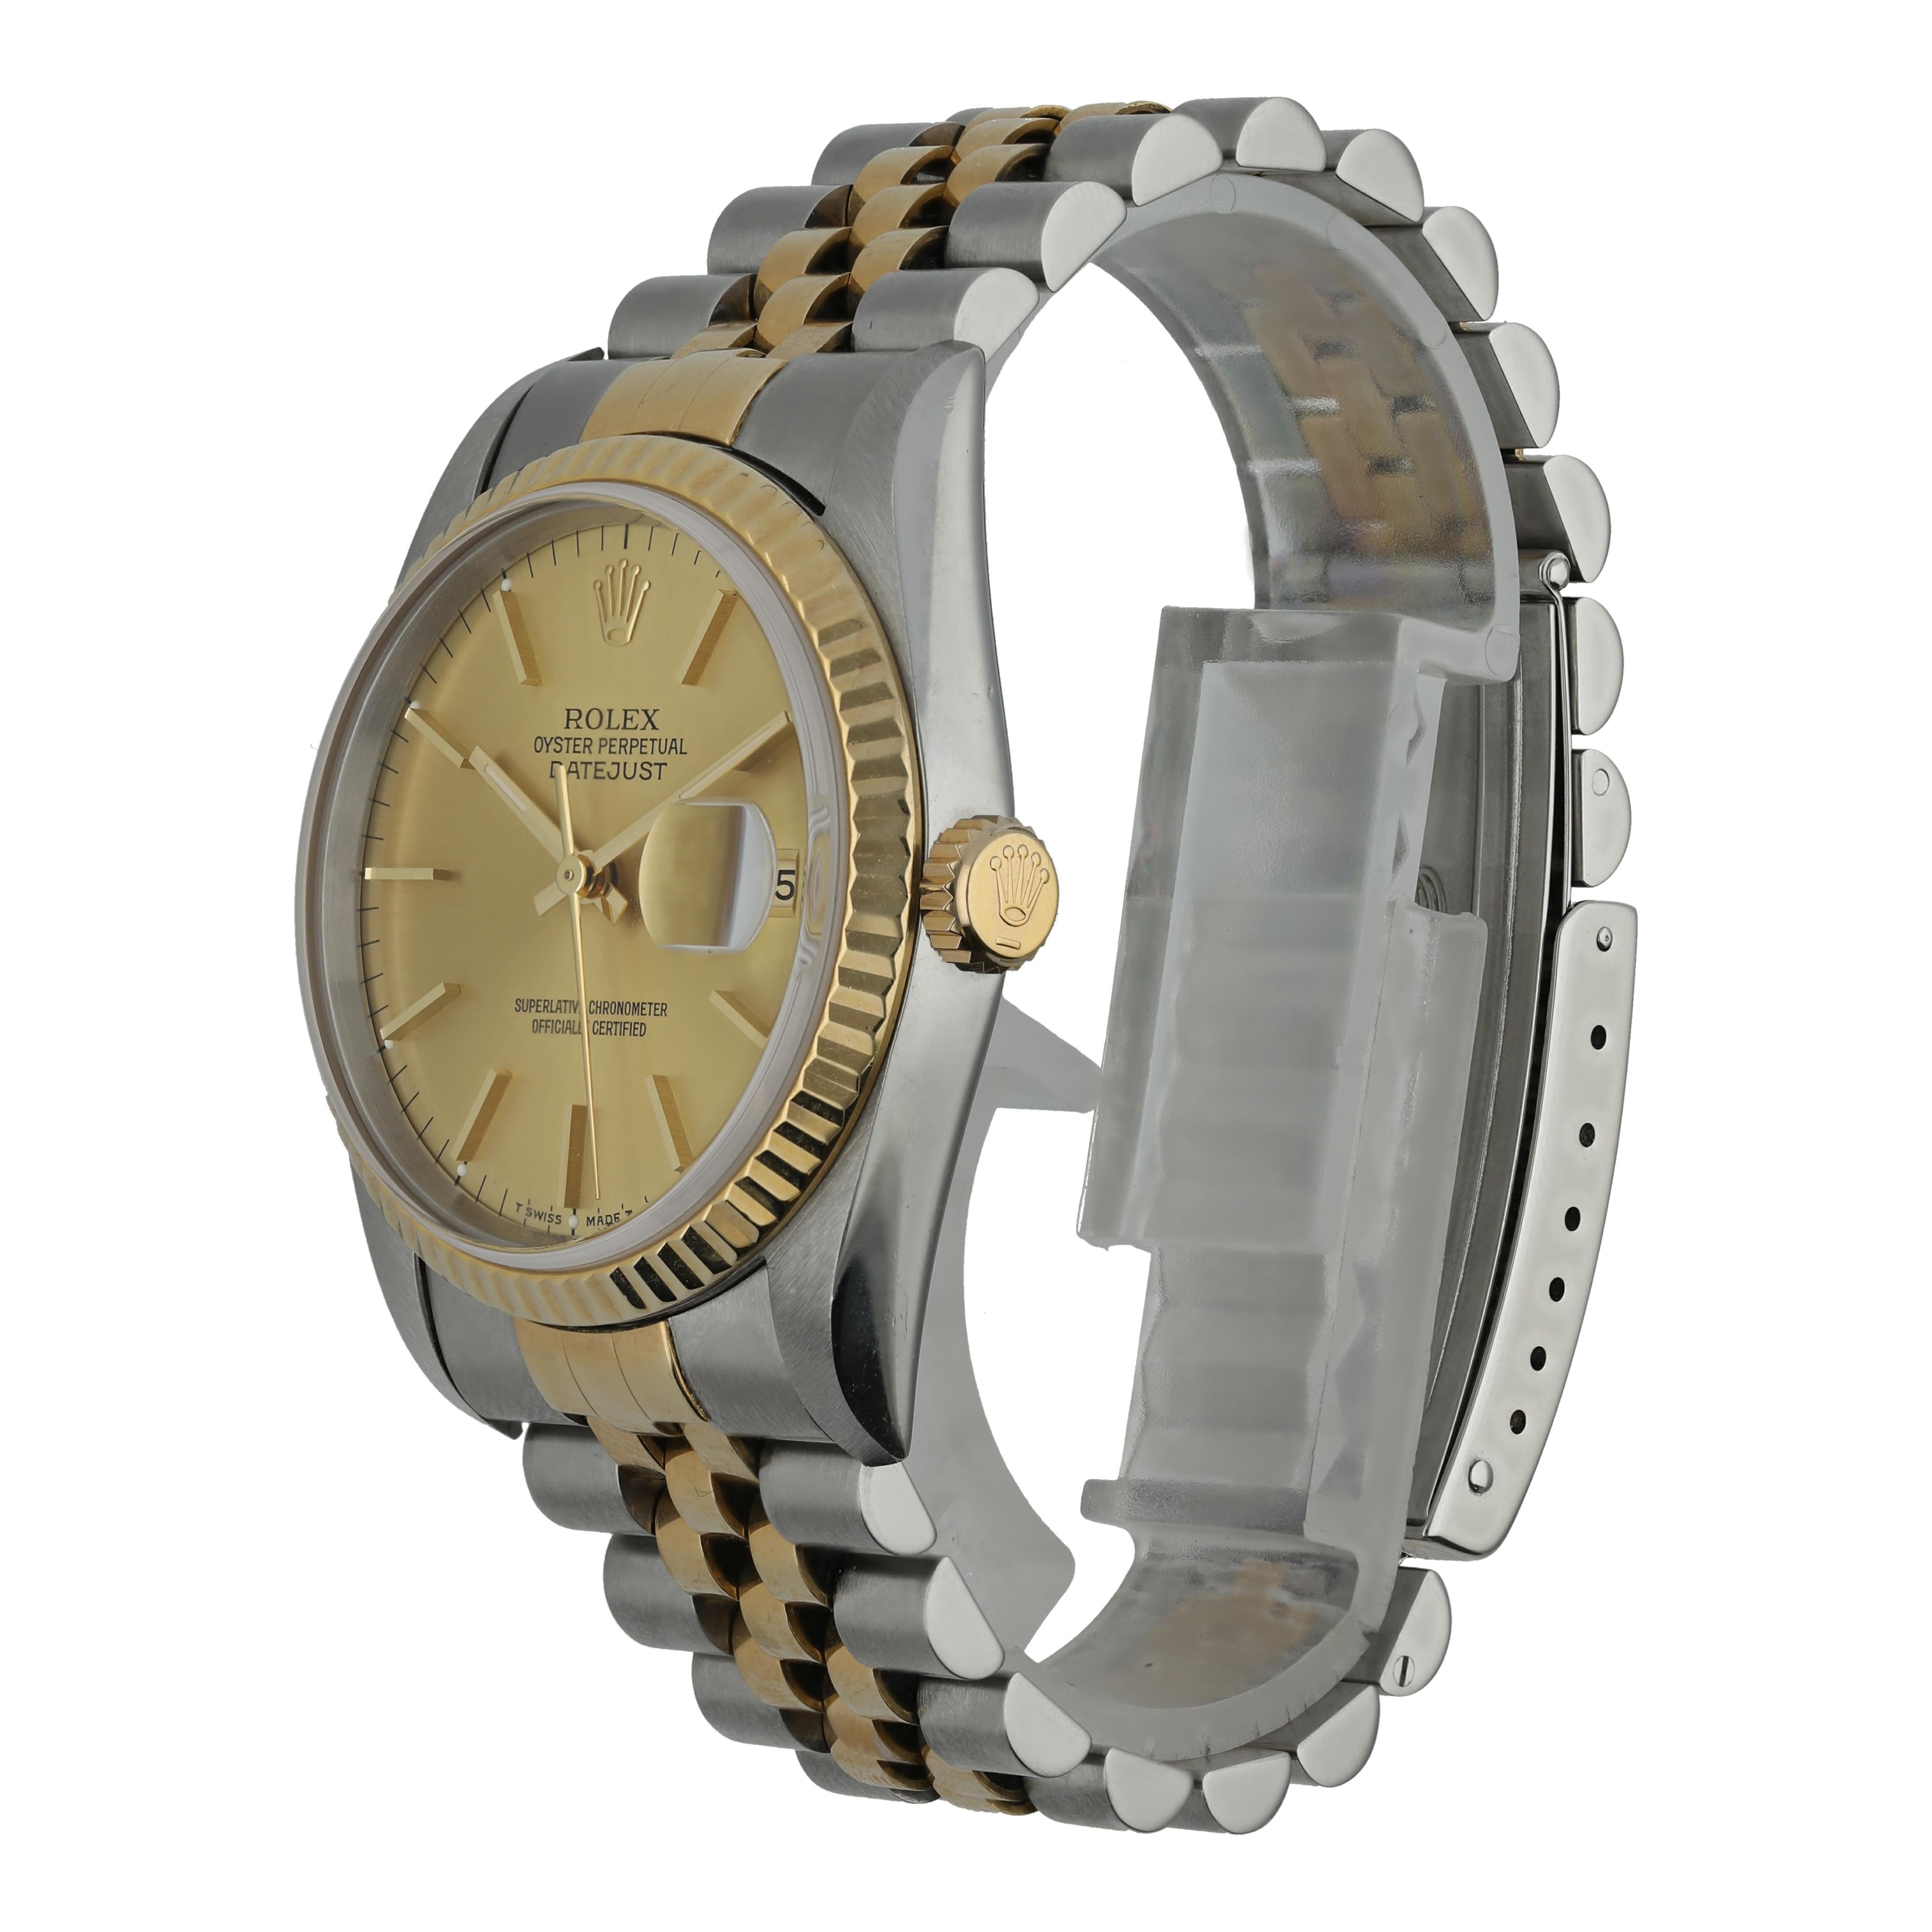 Rolex Datejust 16233 Men's Watch.
36mm Stainless Steel case. 
Yellow Gold fluted bezel. 
Champagne dial with Luminous Steel hands and index hour markers. 
Minute markers on the outer dial. 
Date display at the 3 o'clock position. 
Stainless Steel